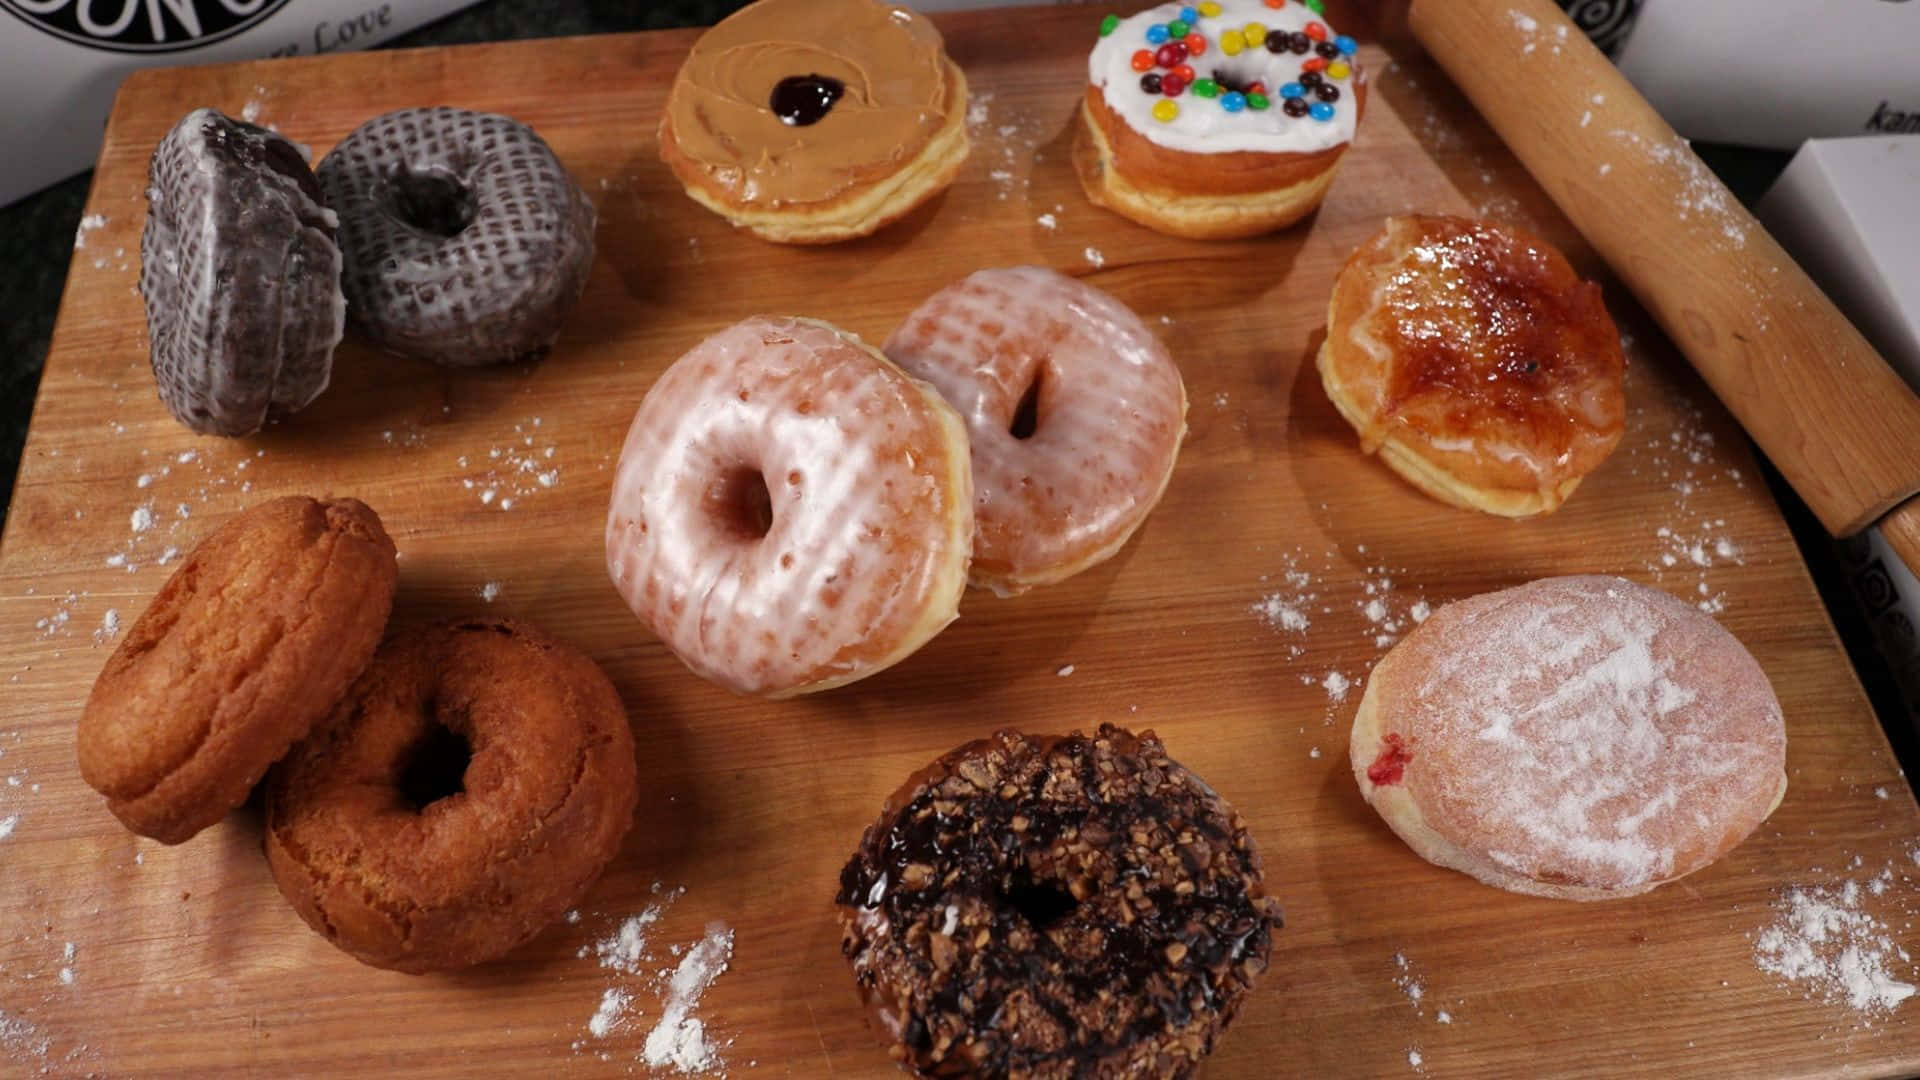 A selection of mouthwatering donuts